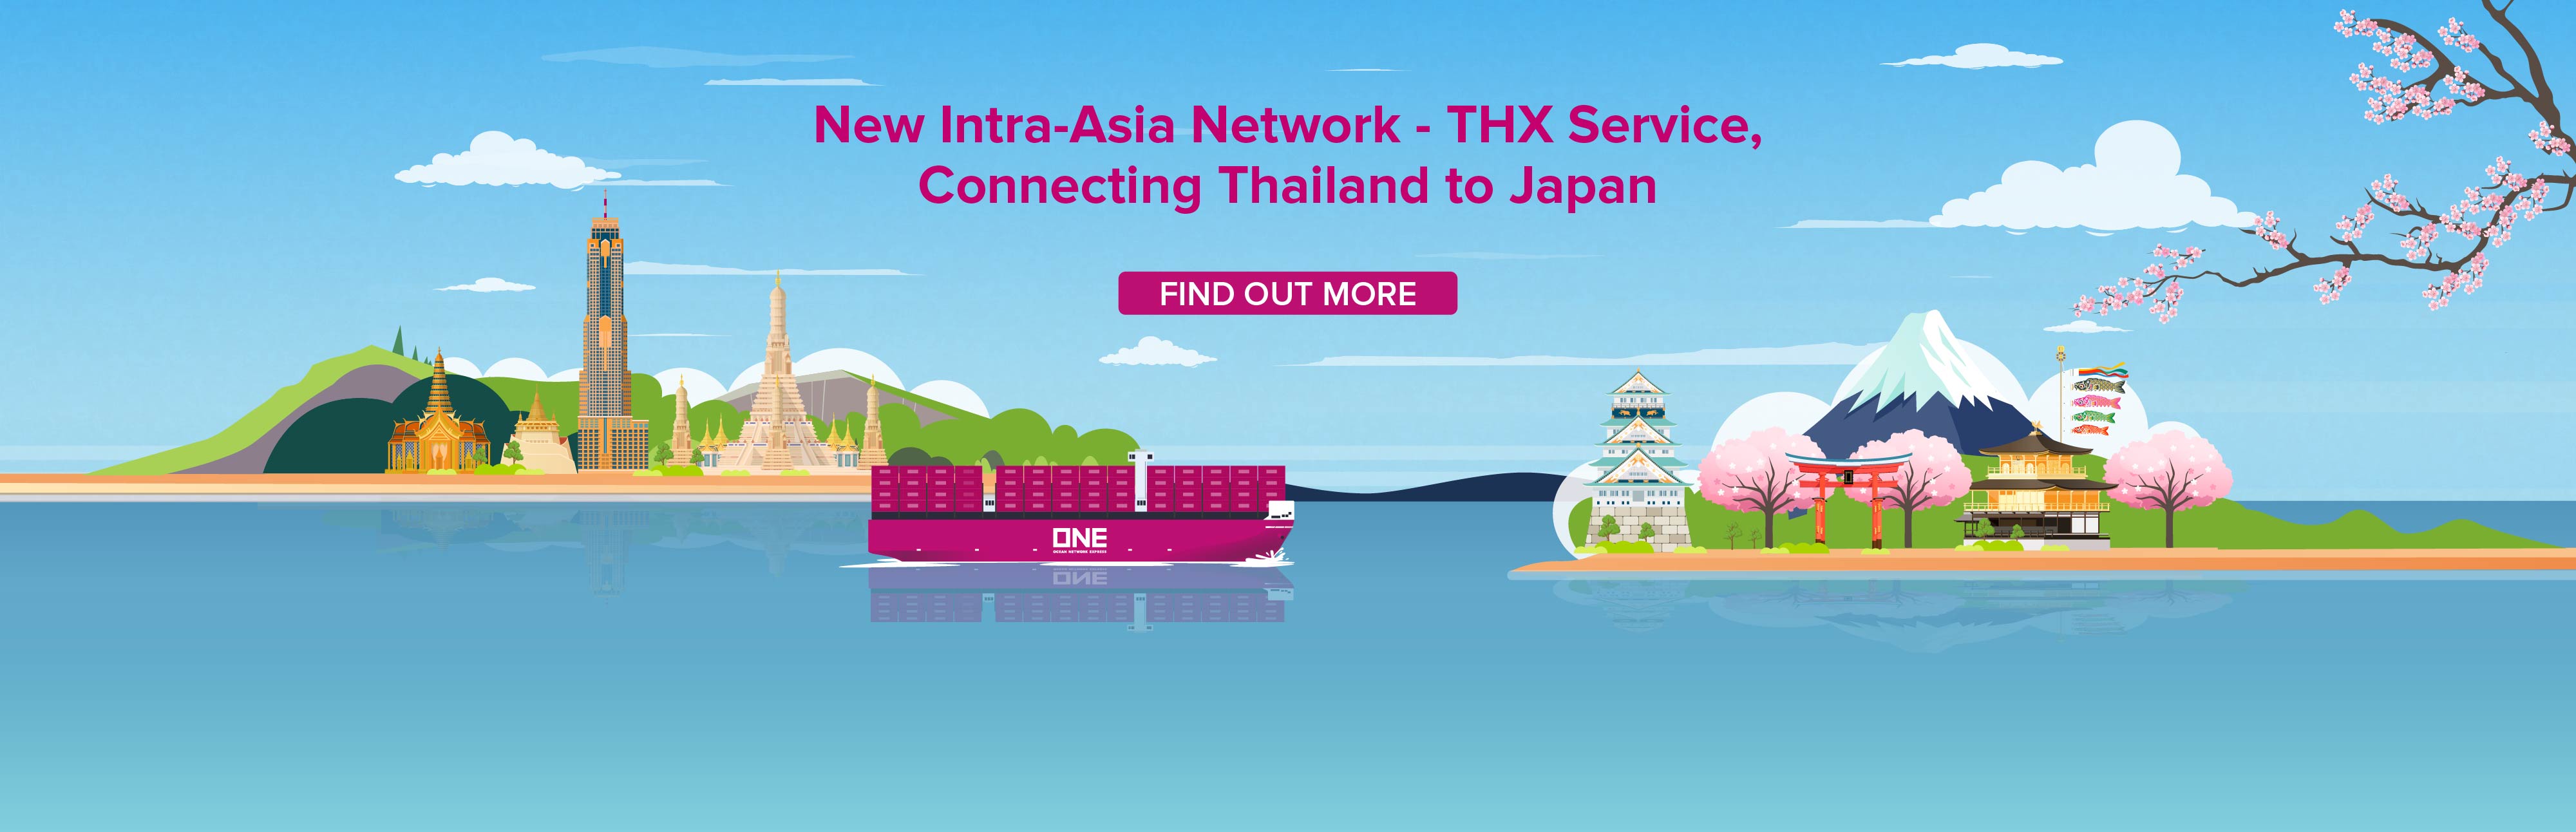 New Intra-Asia Network - THX Service, Connecting Thailand to Japan